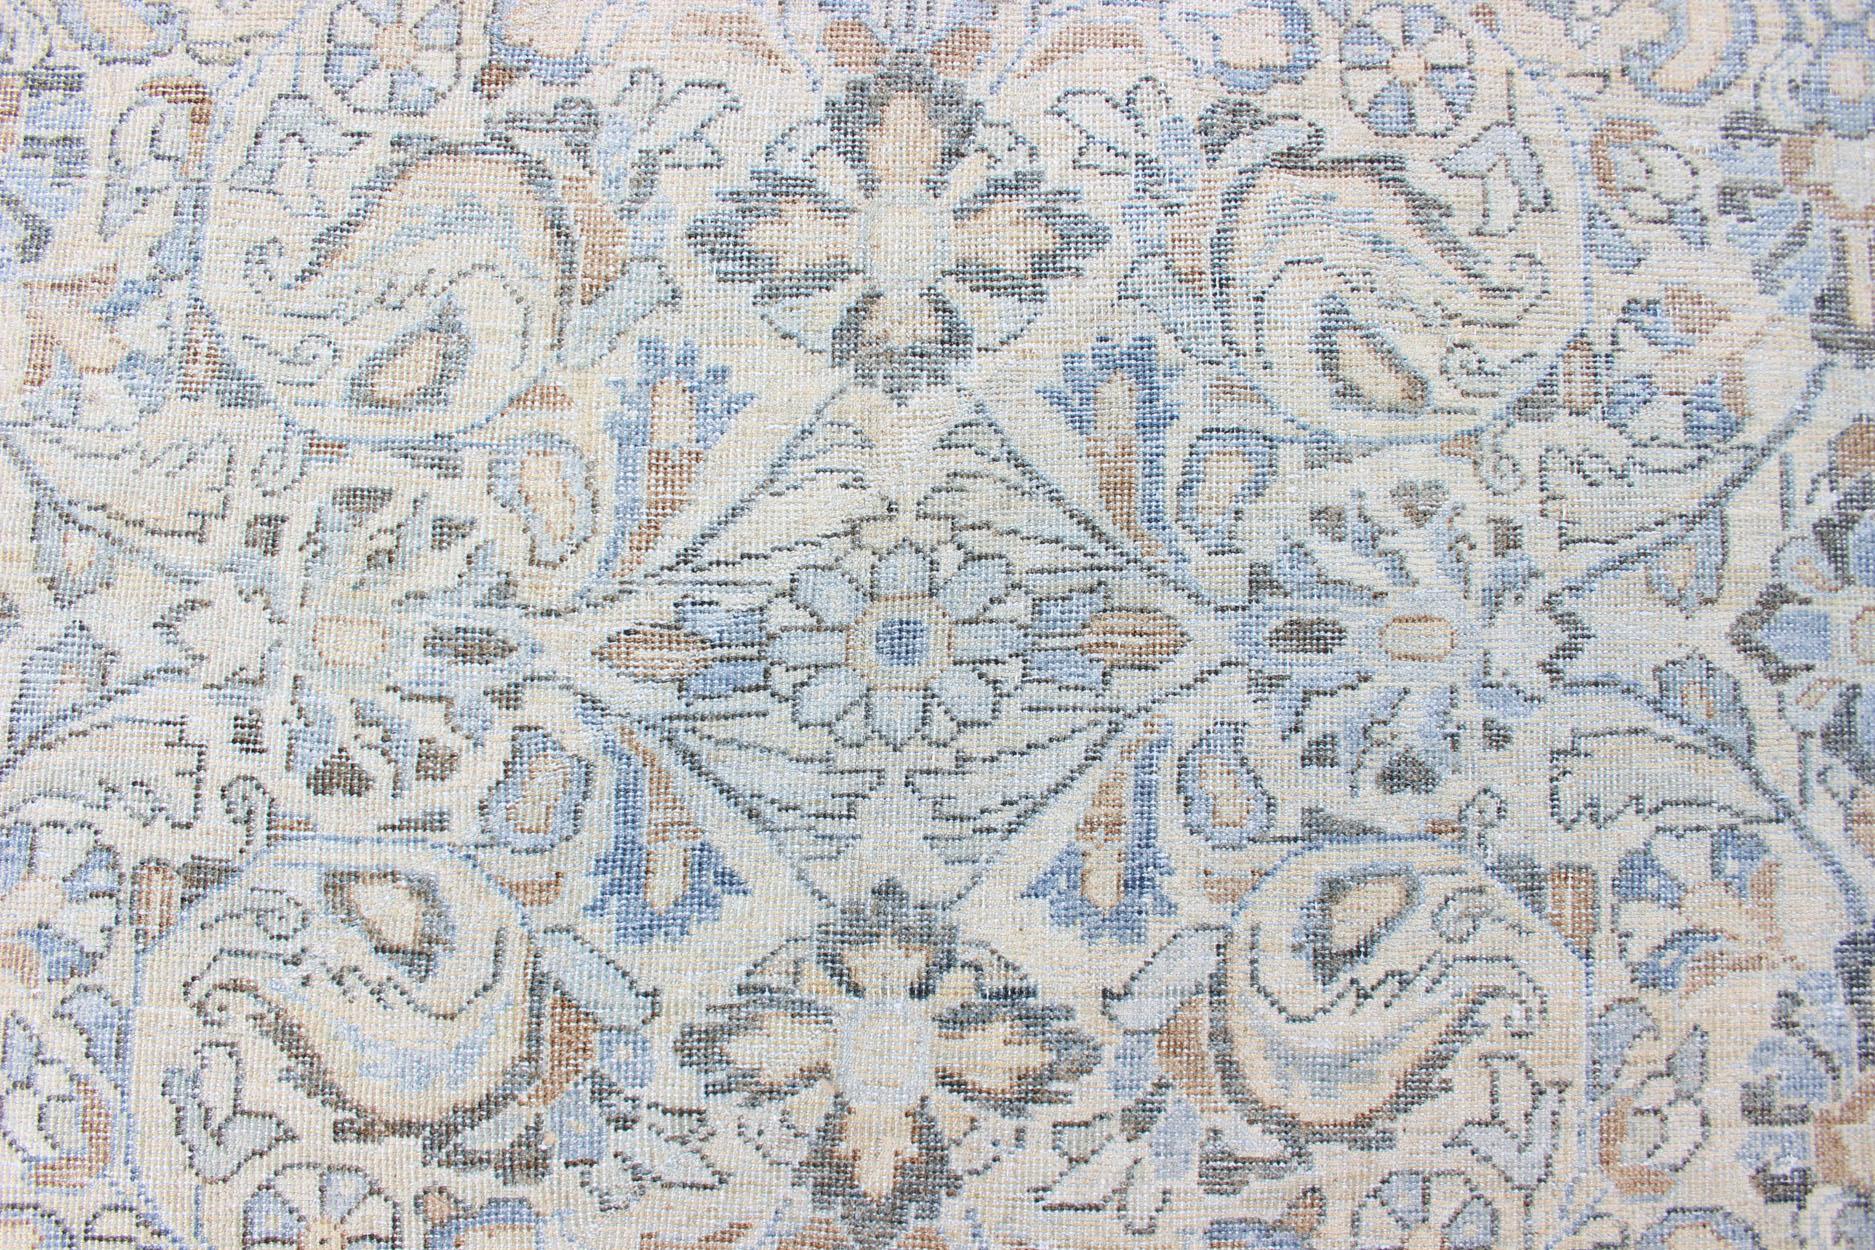 Antique Persian Mahal Rug with Sub Floral Design in Blue, Charcoal & Cream 4